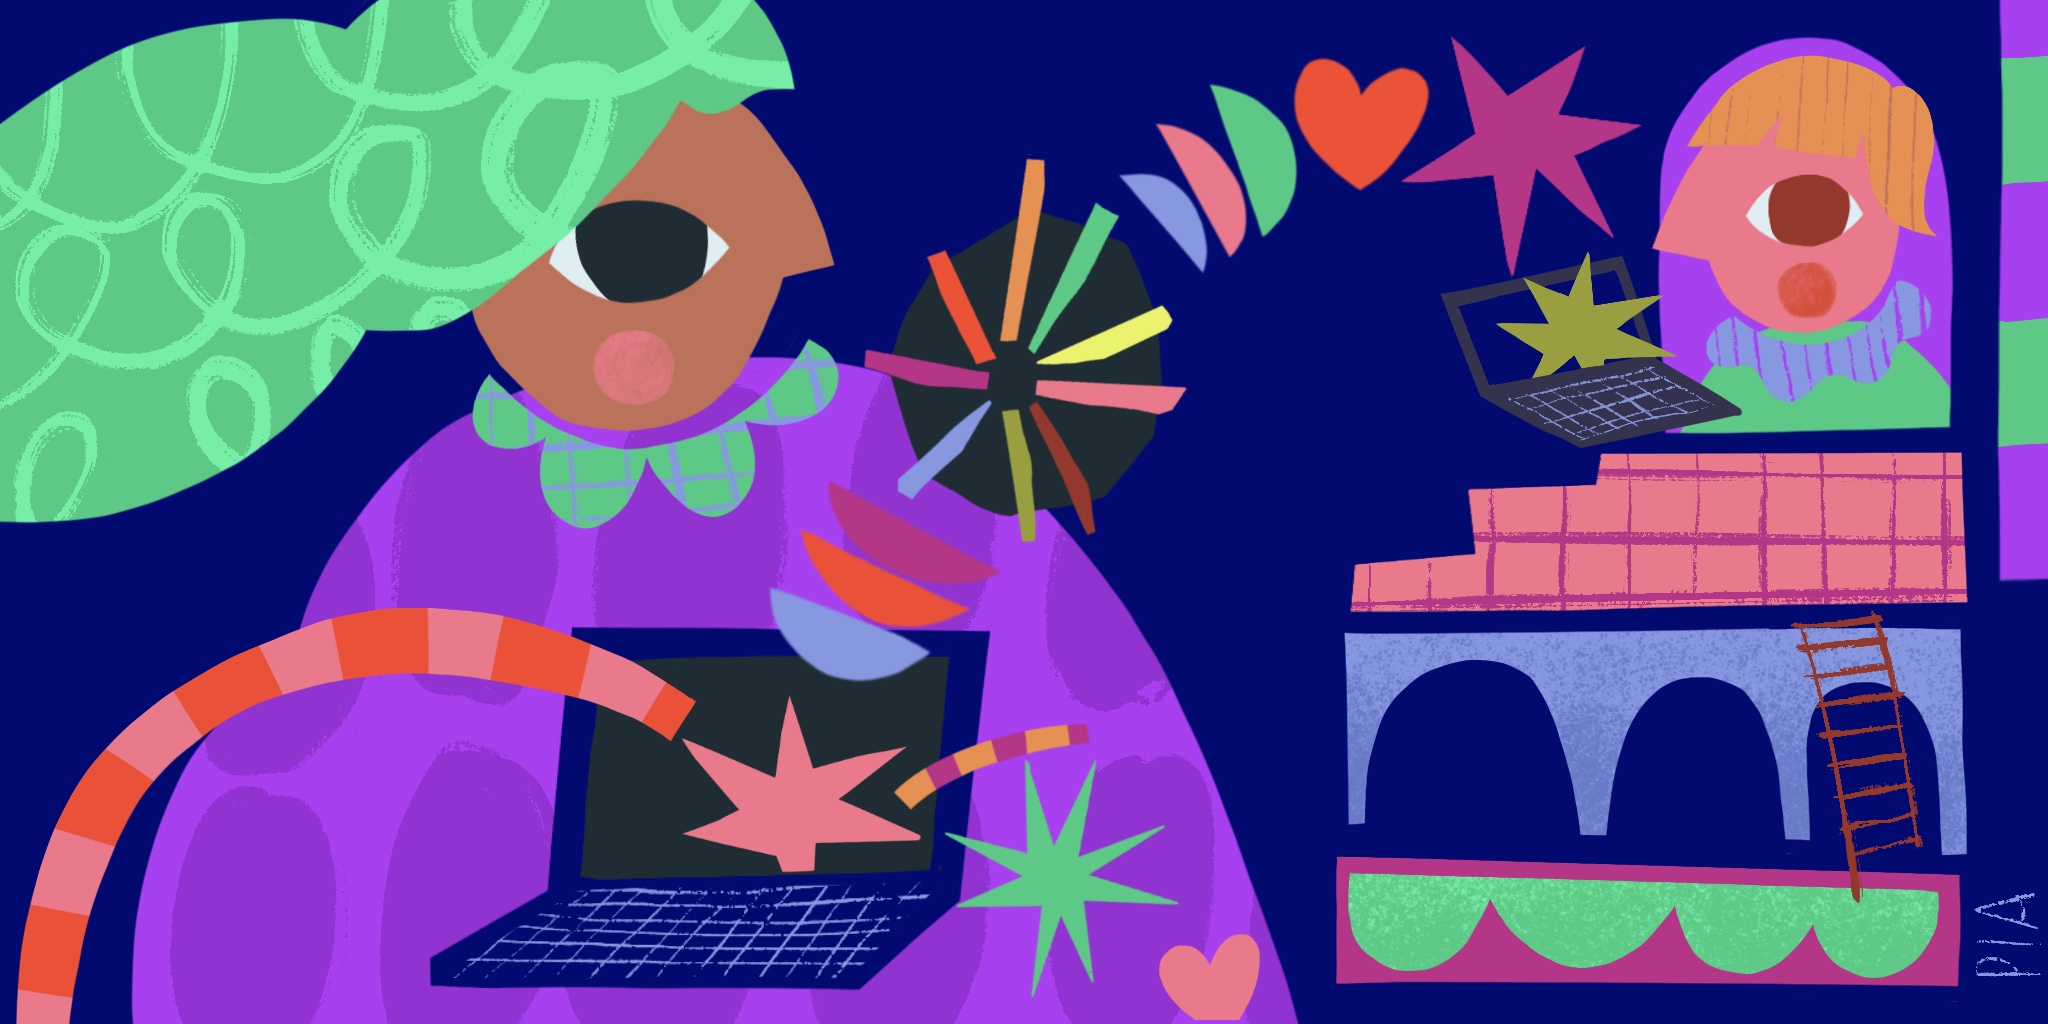 Abstract illustration of a woman with a laptop and colourful shapes flying out